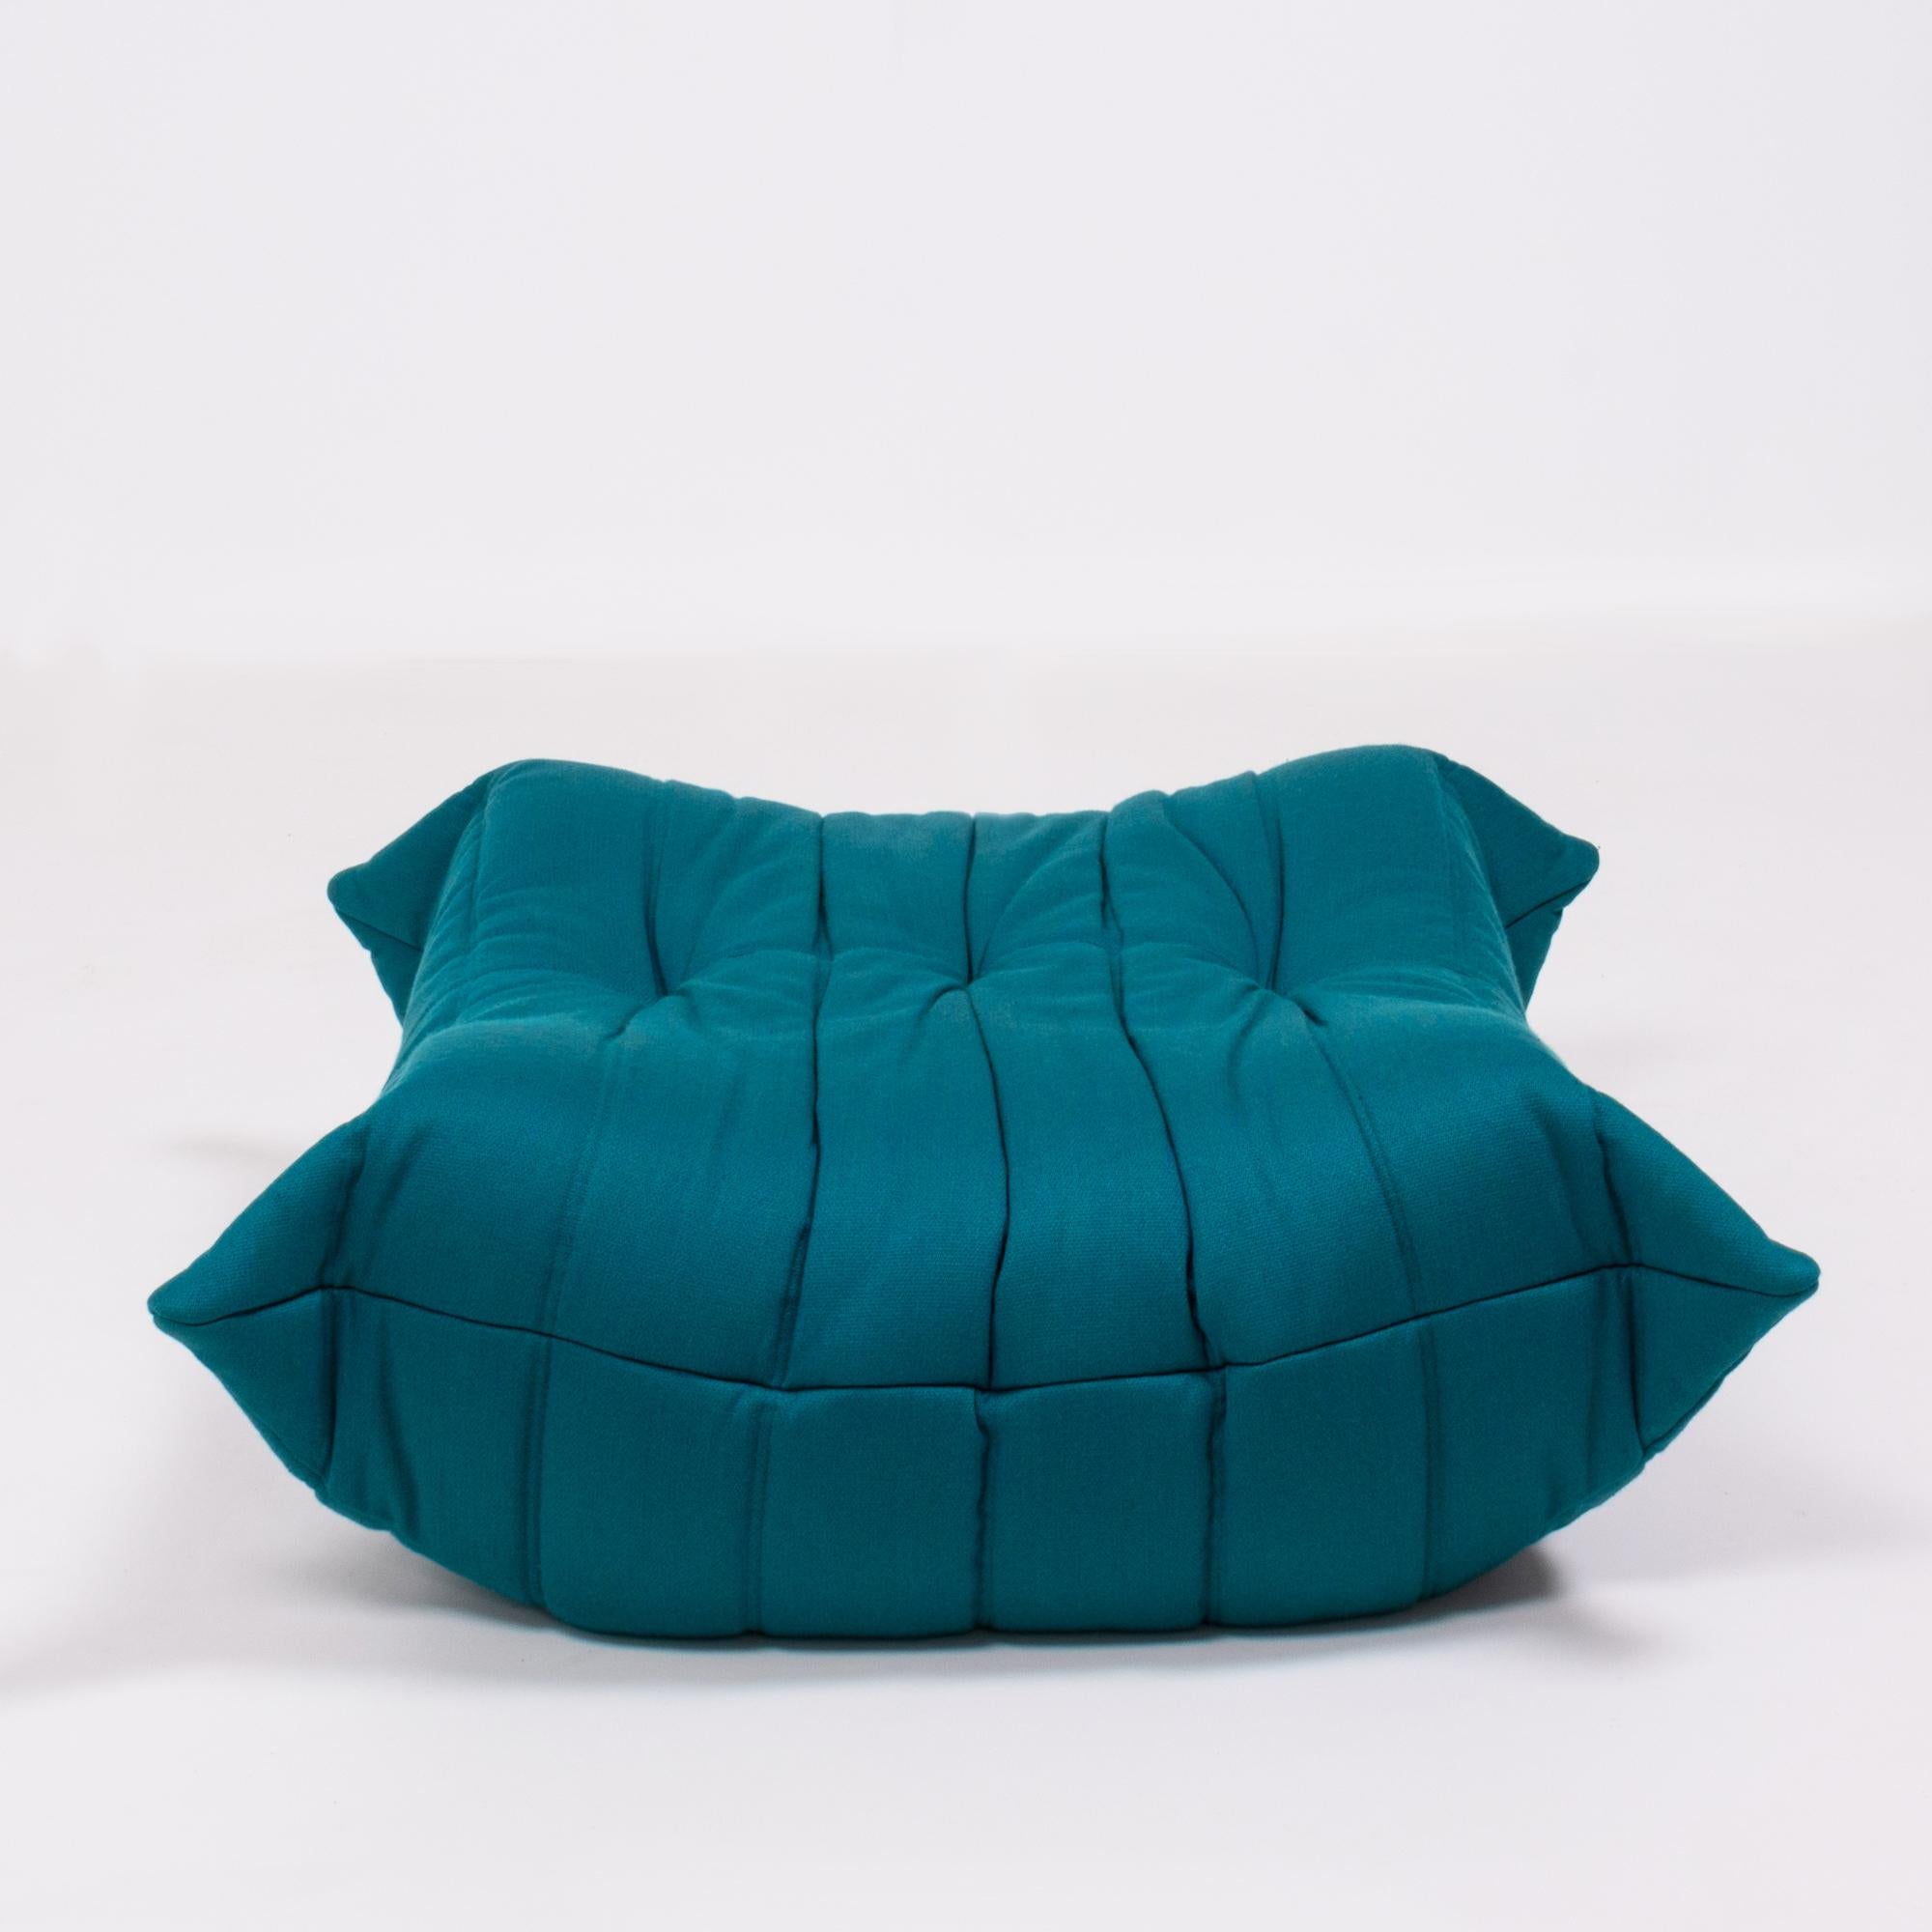 Togo Teal Armchair and Footstool by Michel Ducaroy for Ligne Roset, Set of 2 1